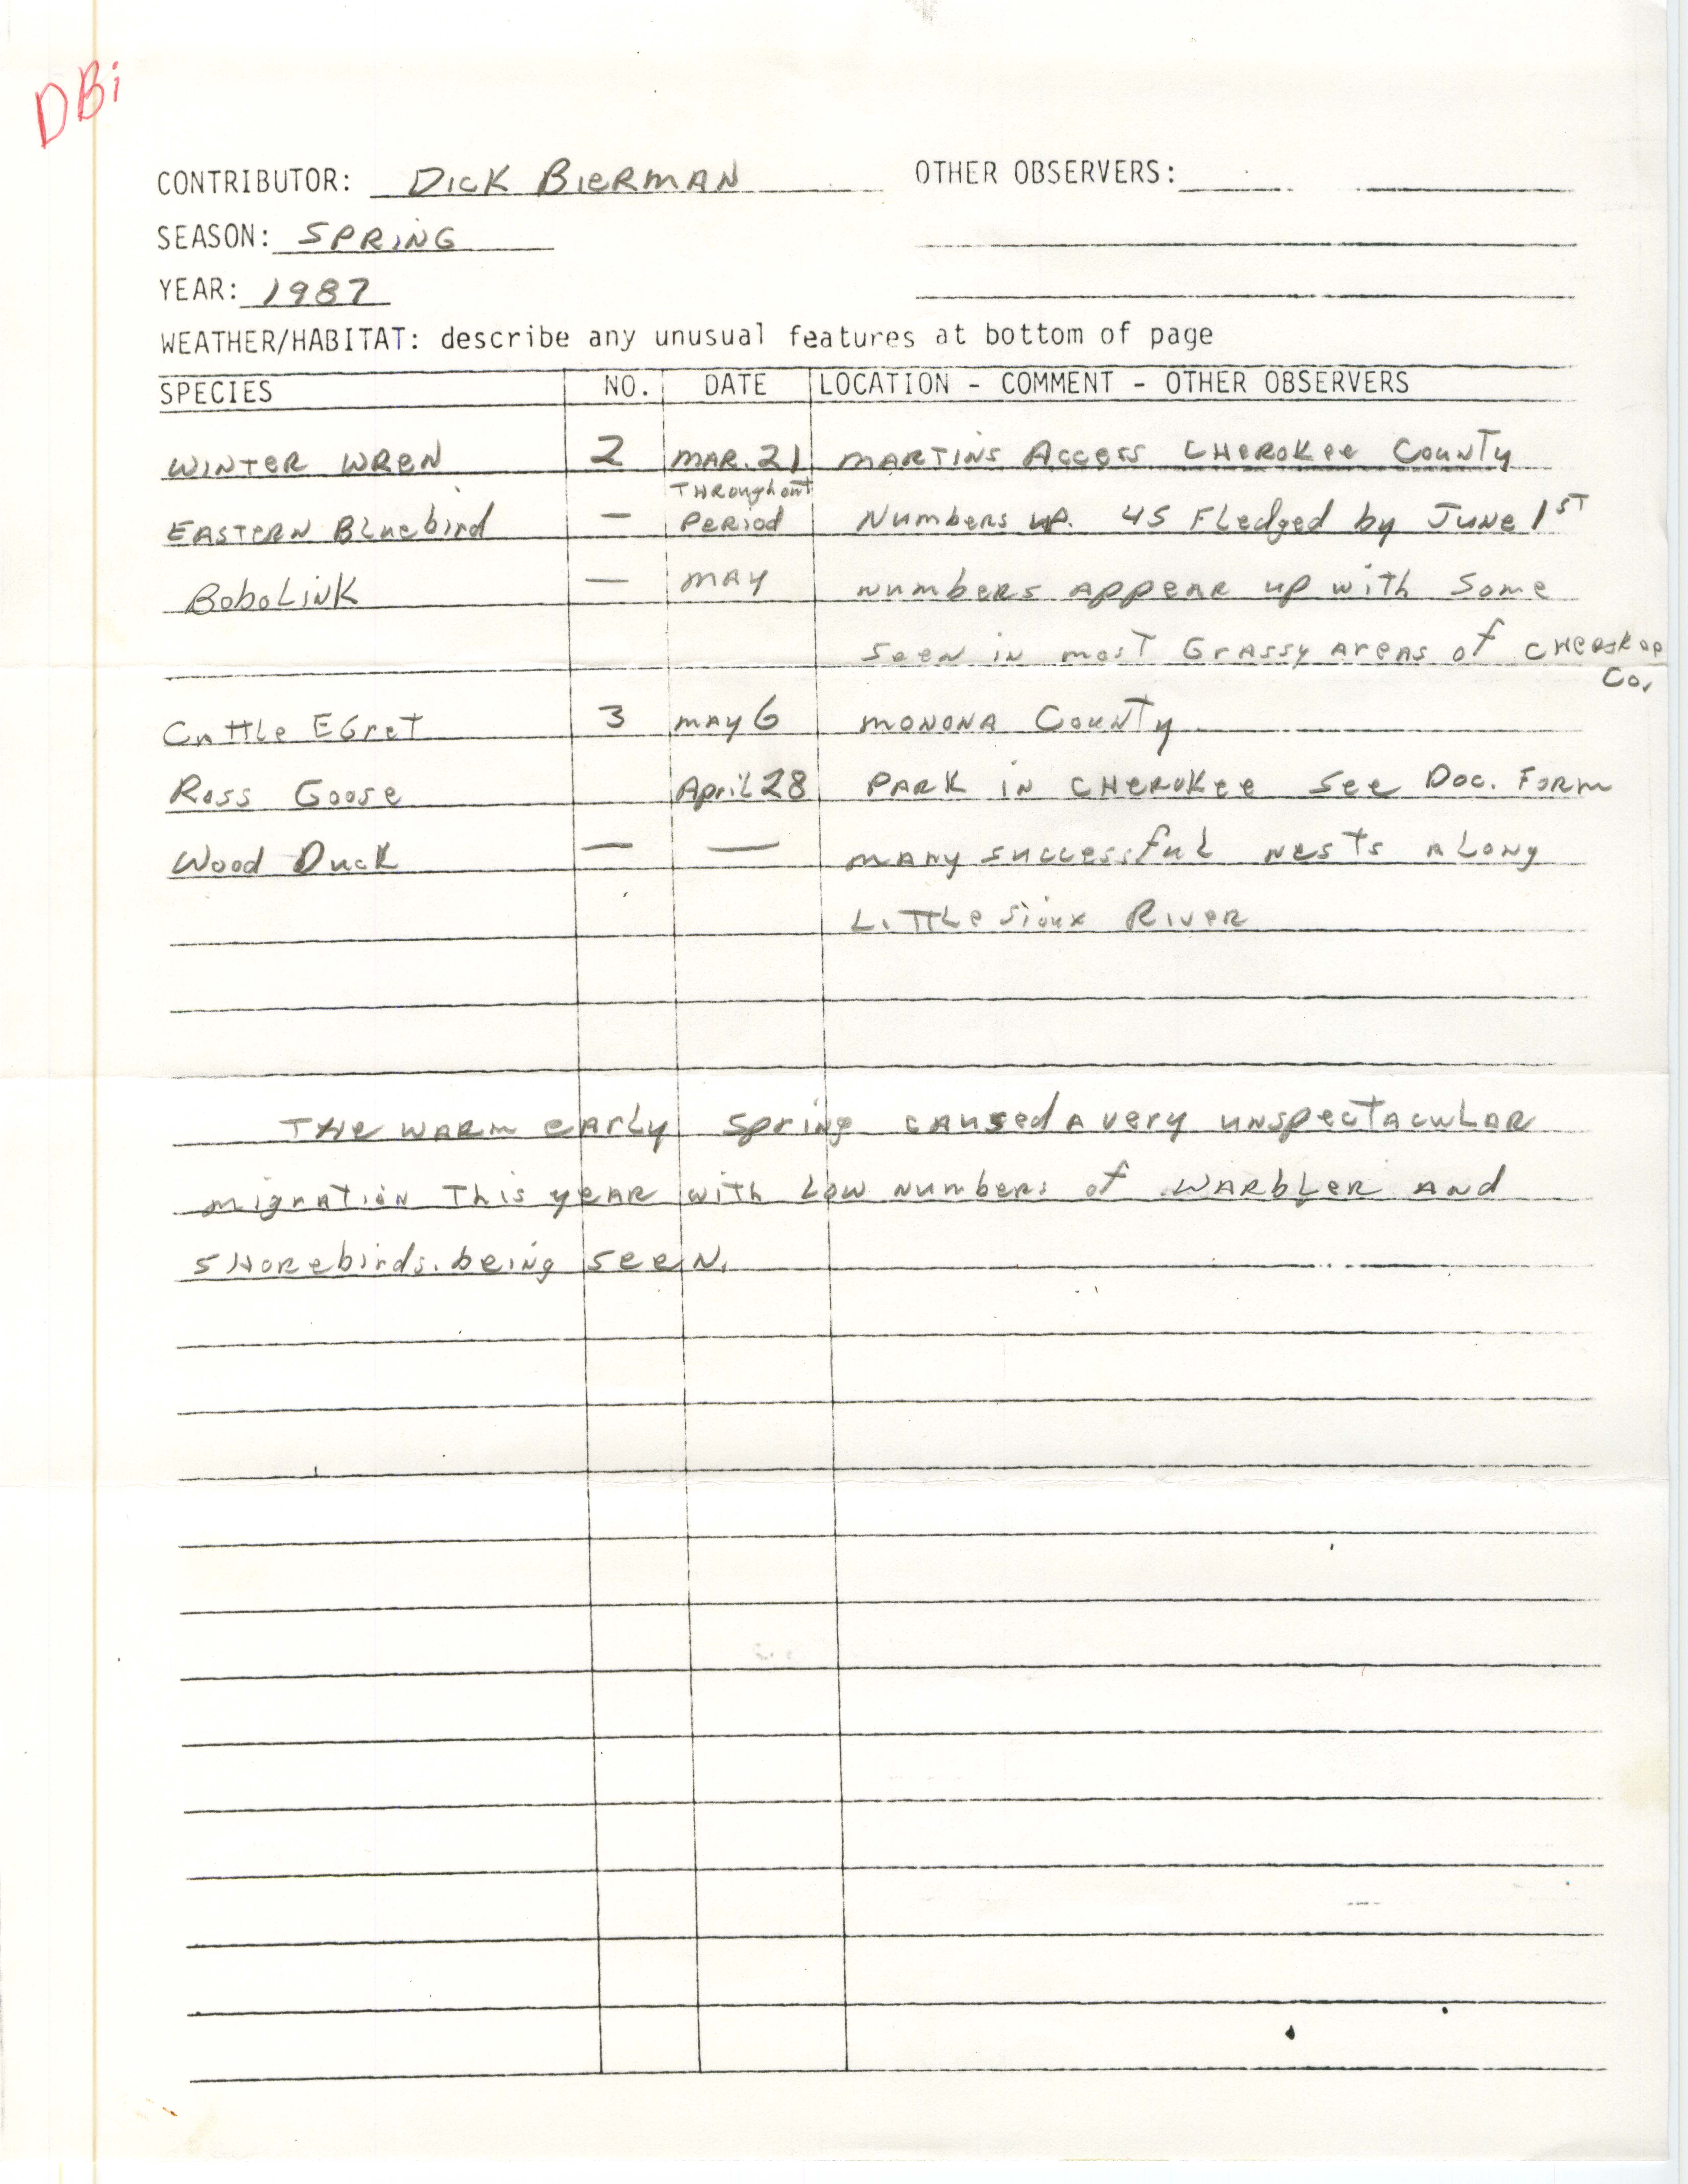 Field notes contributed by Dick Bierman, spring 1987